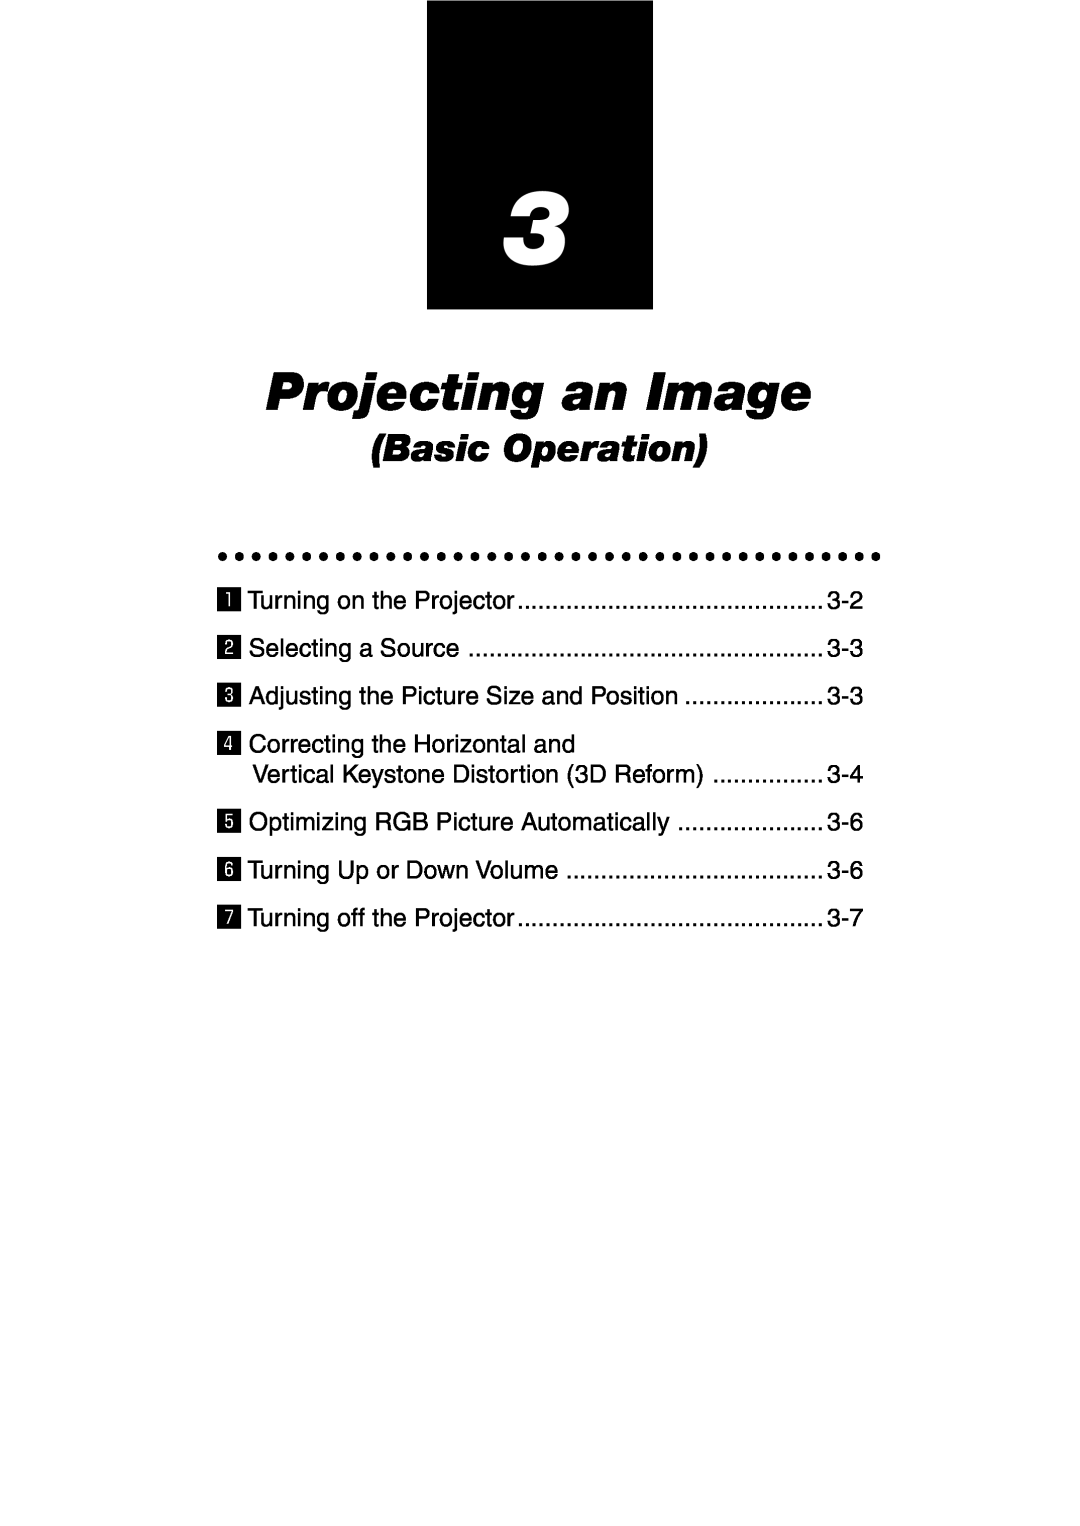 NEC GT6000 user manual Projecting an Image, Basic Operation 